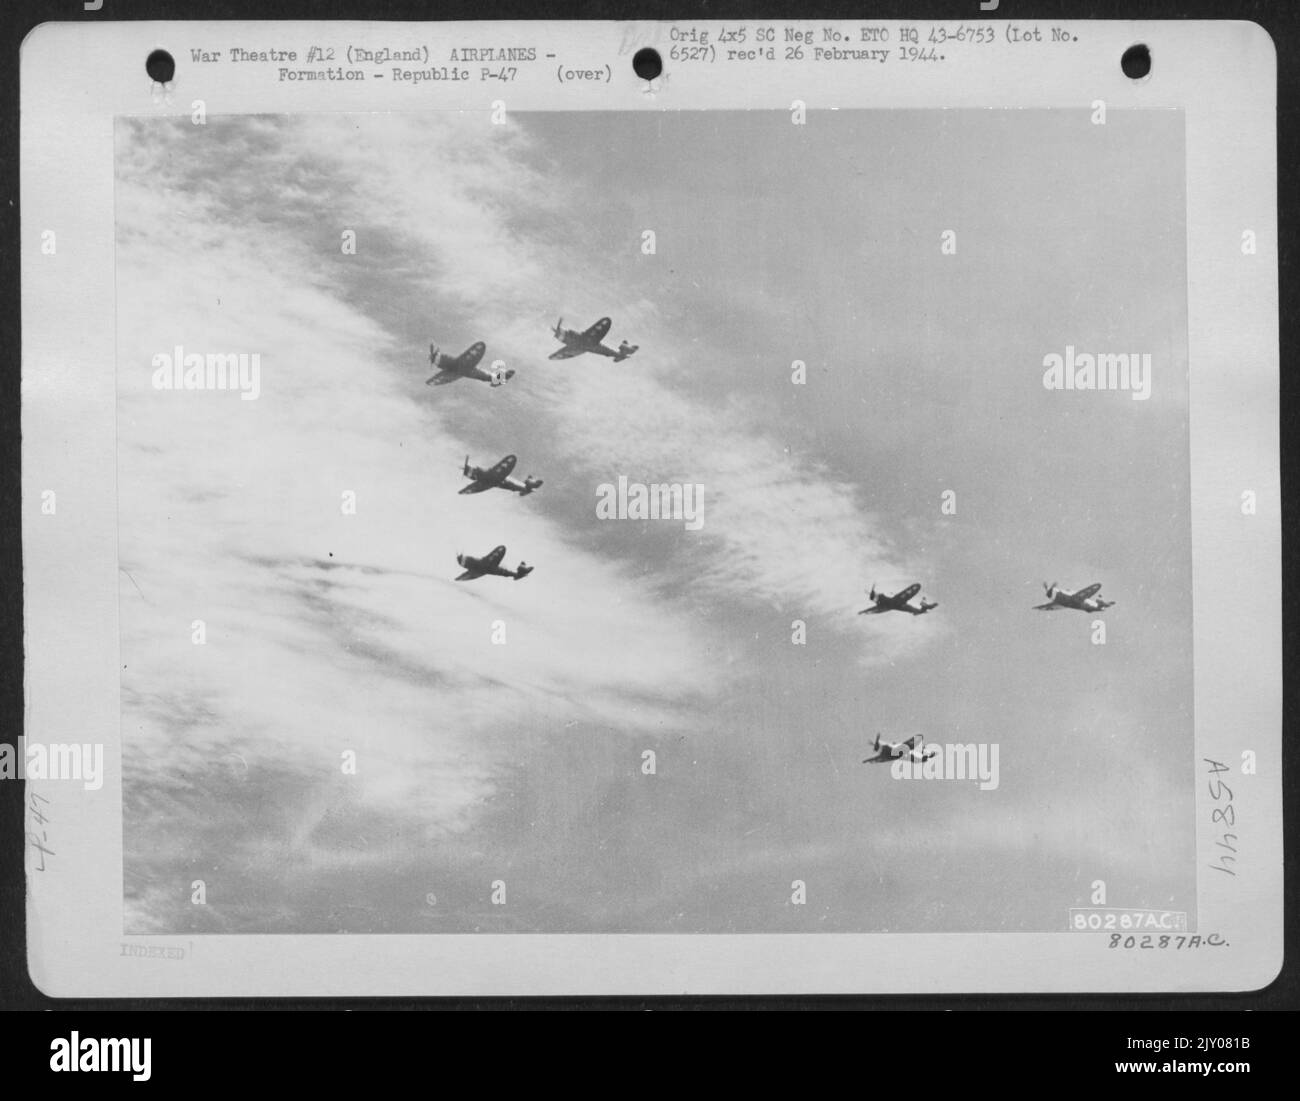 Formation Of Republic P-47 Give Fighter Cover To B-17S While On A Practice Mission Over Molesworth, England. 18 September 1943. Stock Photo